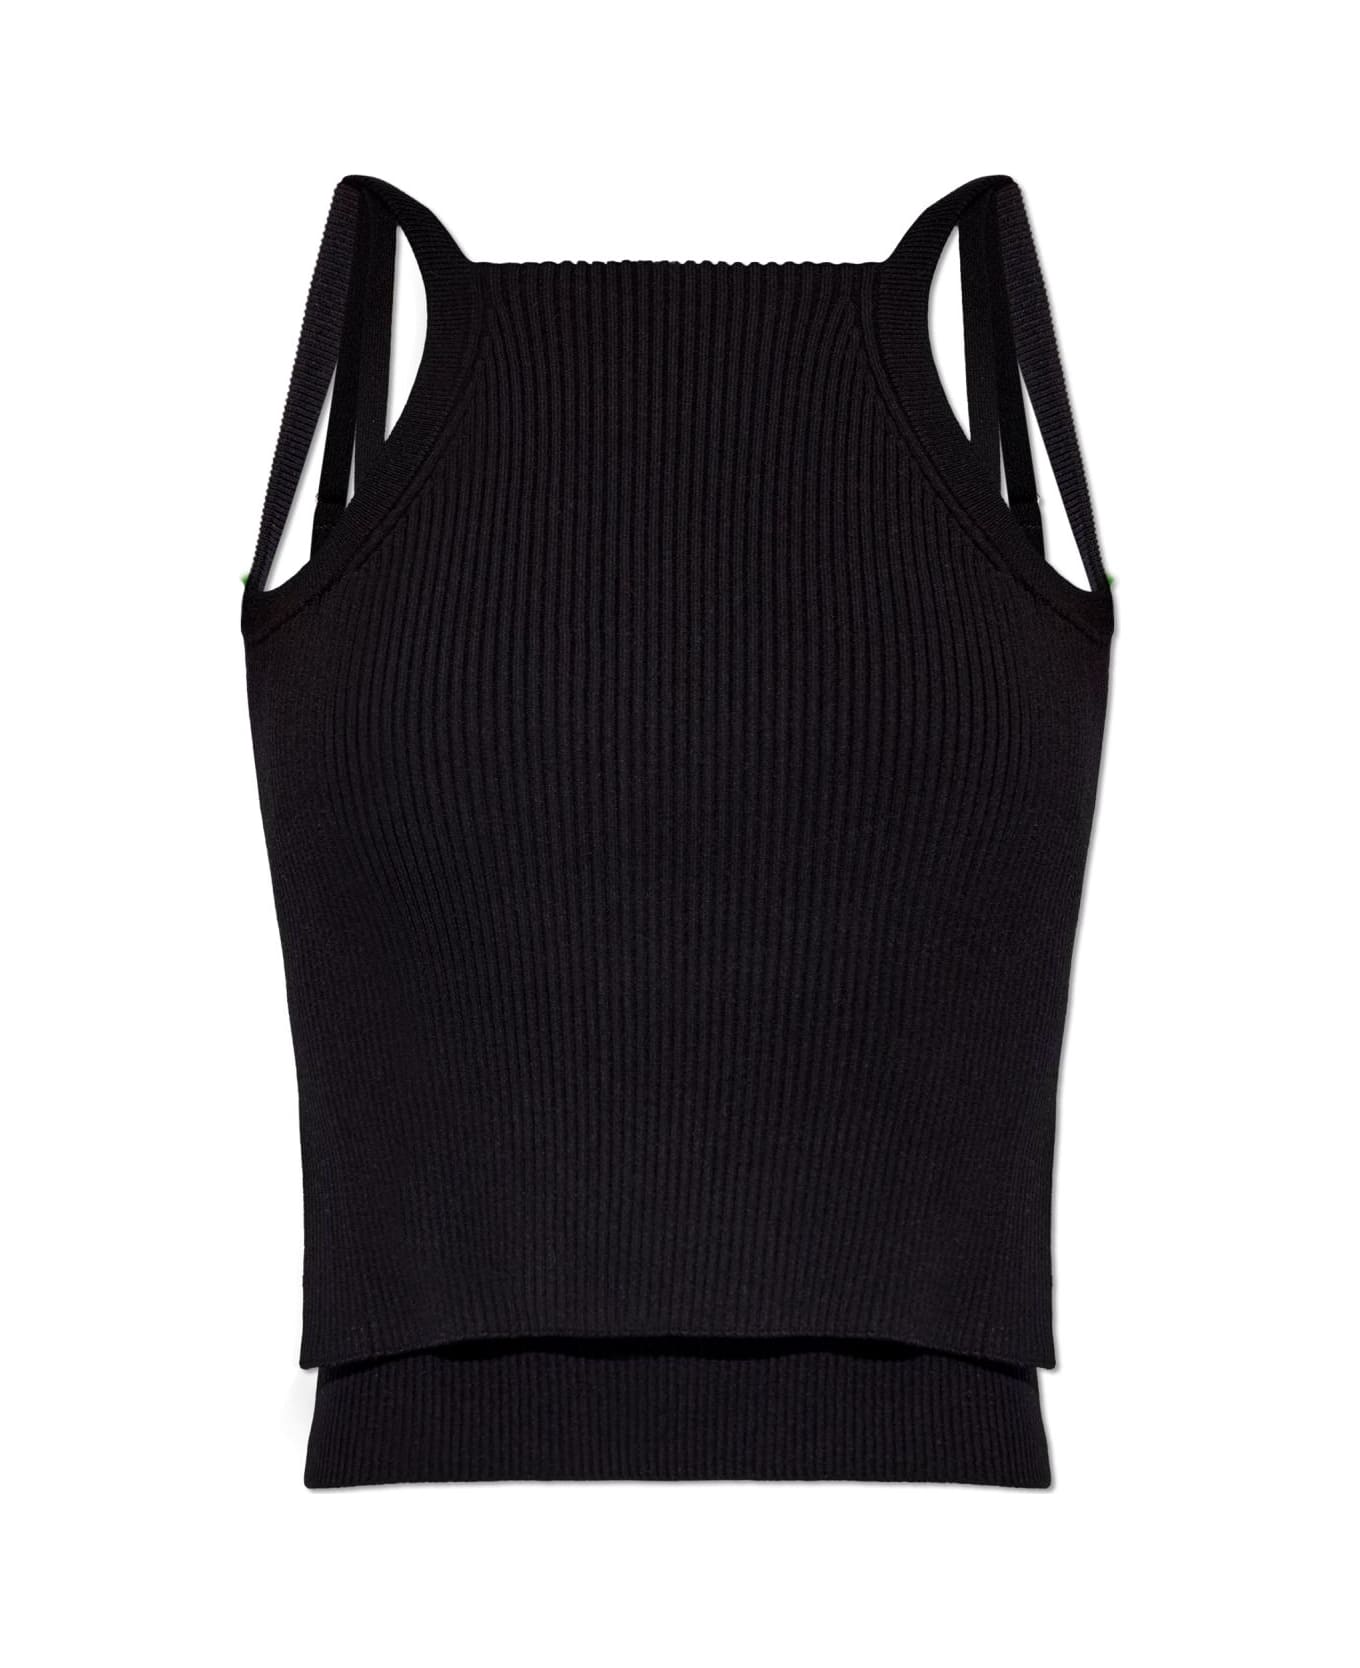 Emporio Armani Top From The 'sustainability' Collection - Black